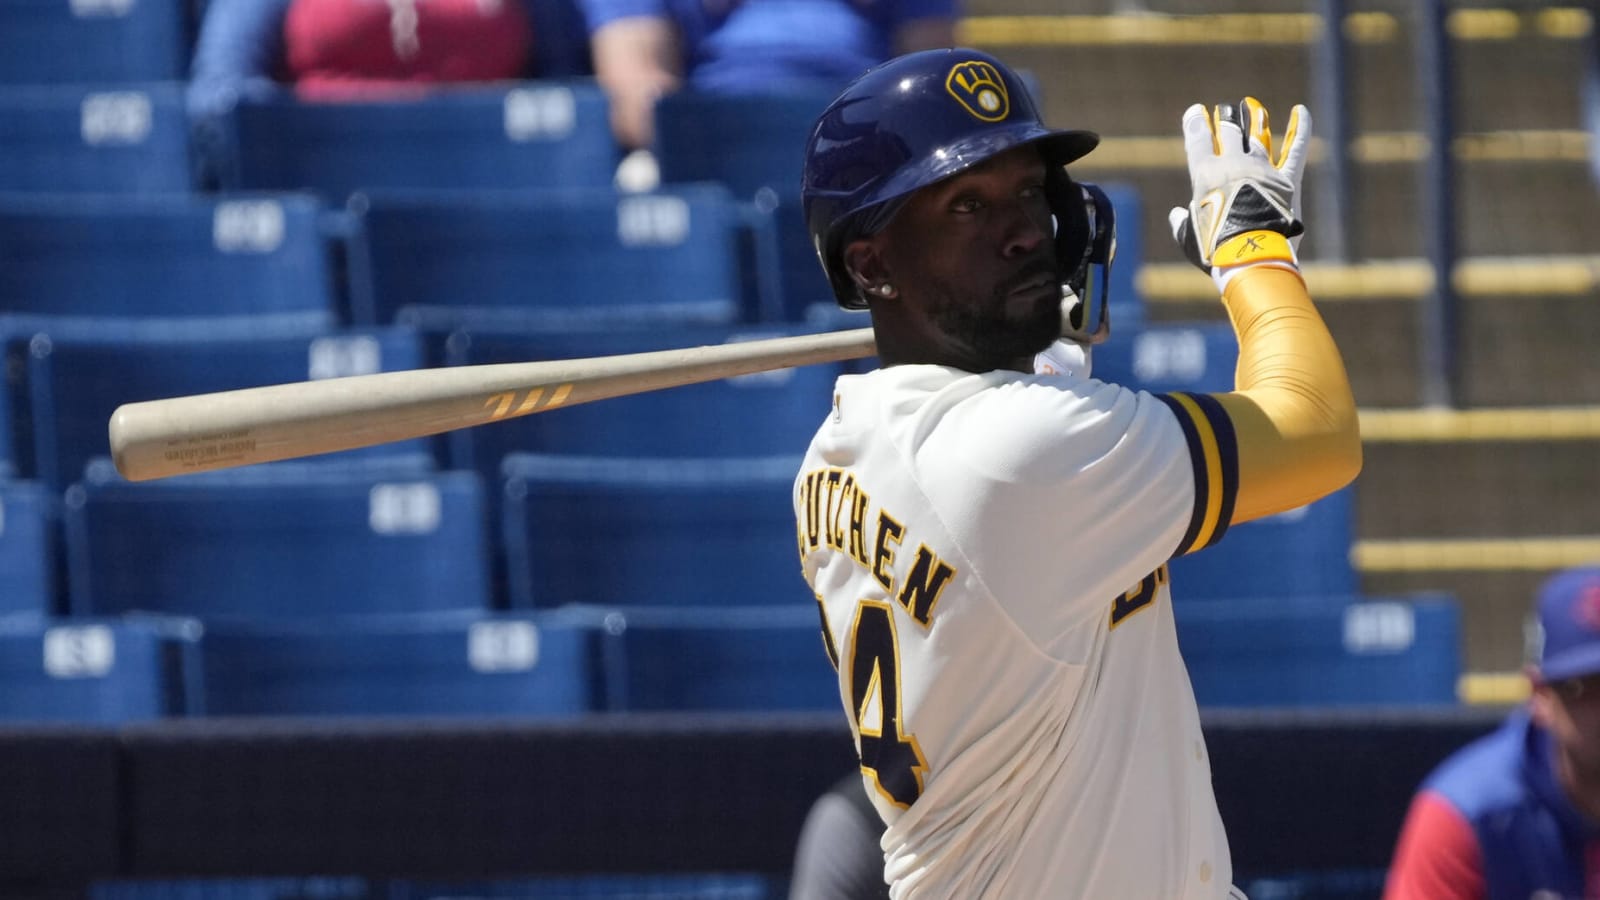 Andrew McCutchen has one complaint after being hit by Cubs